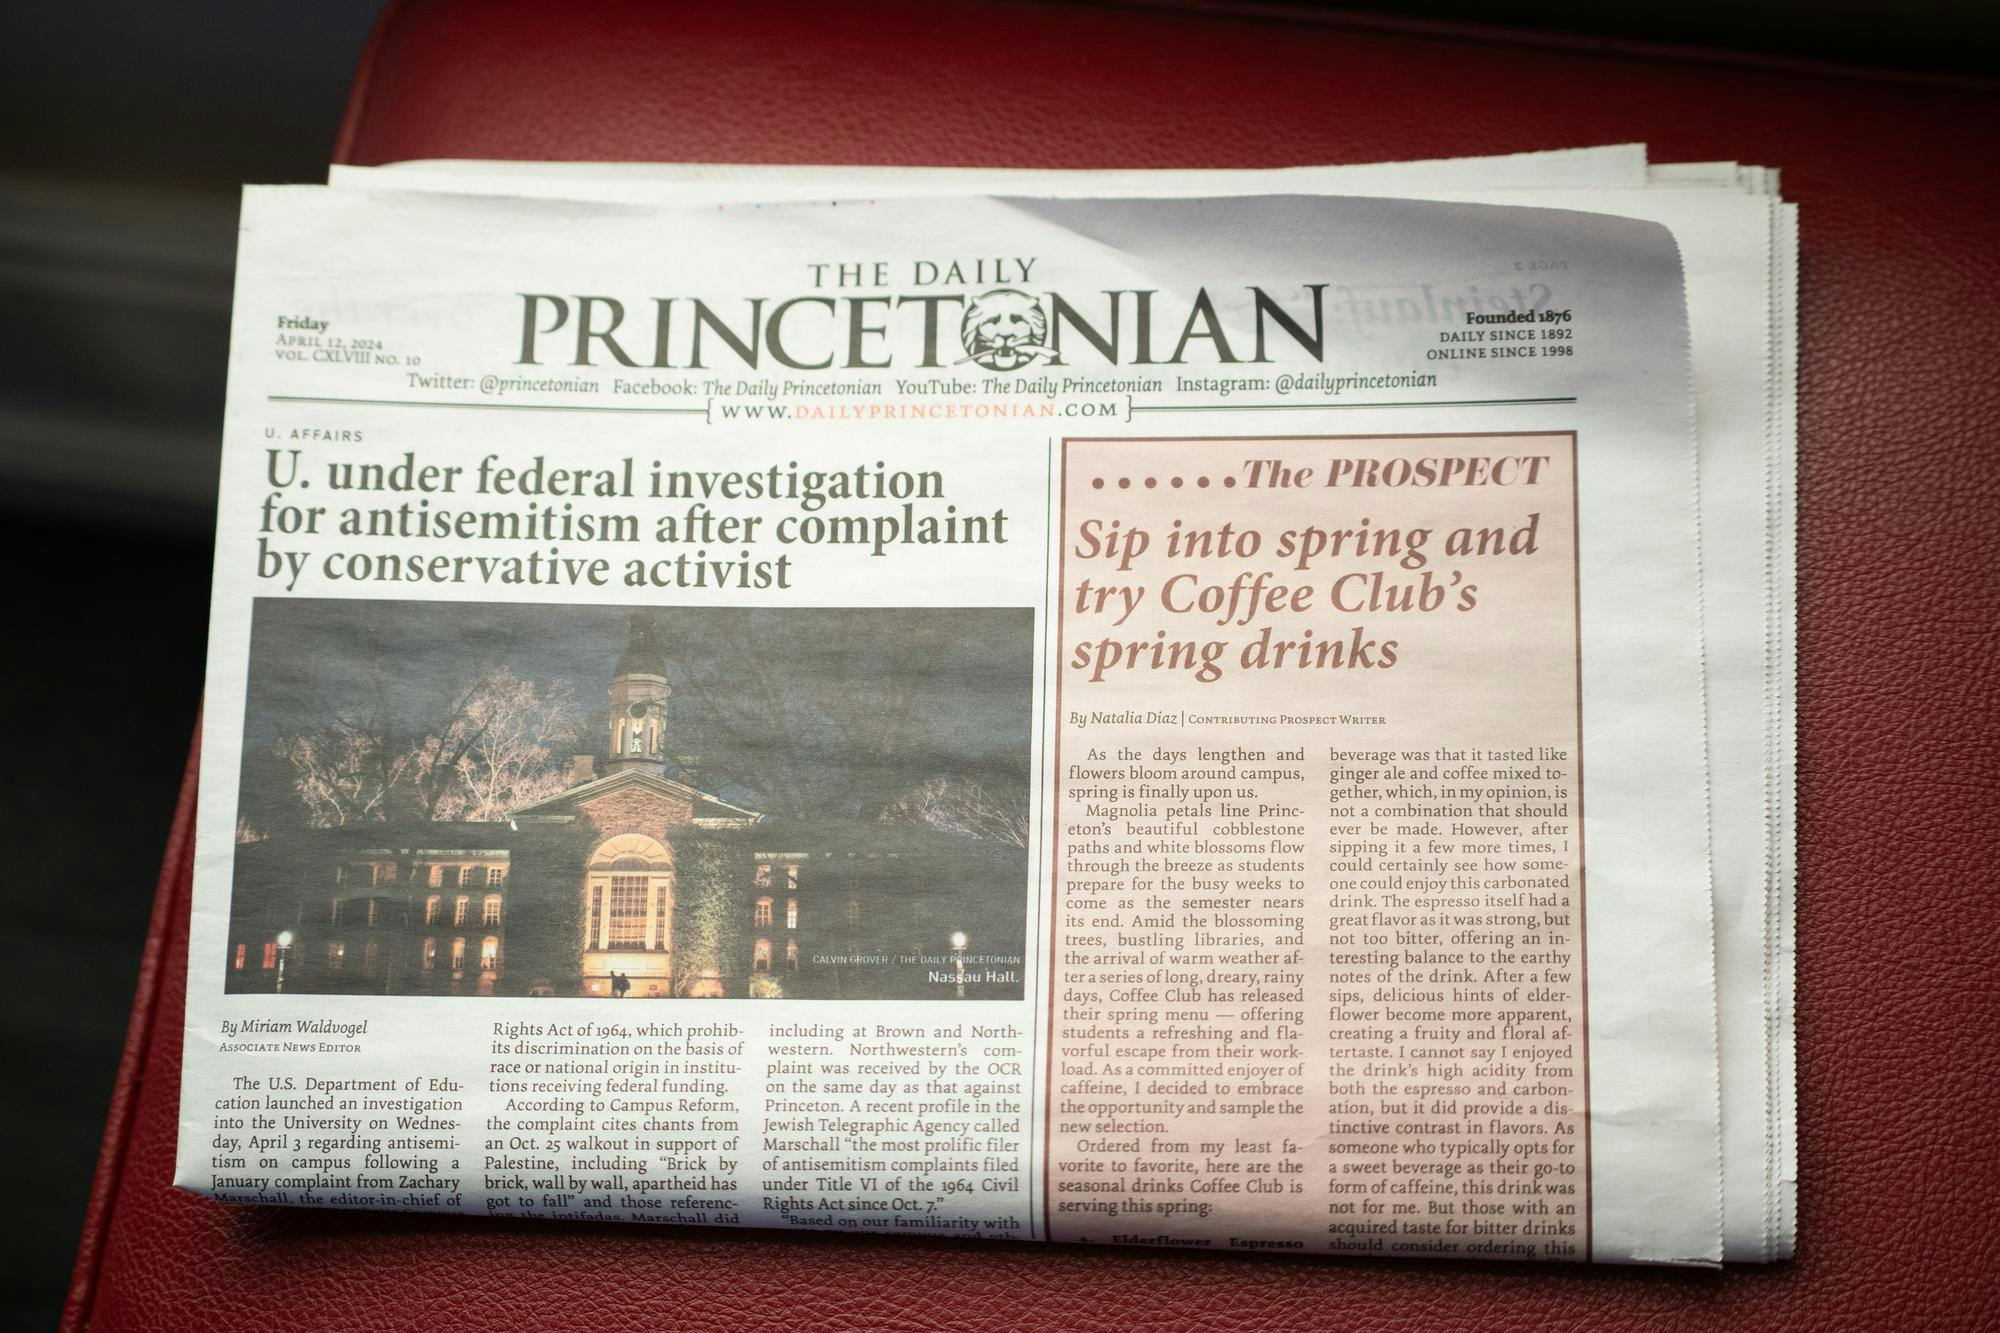 A print copy of the newspaper with a stock photo of Nassau Hall over an article titled “U. under federal investigation for antisemitism after complaint by conservative activist.”